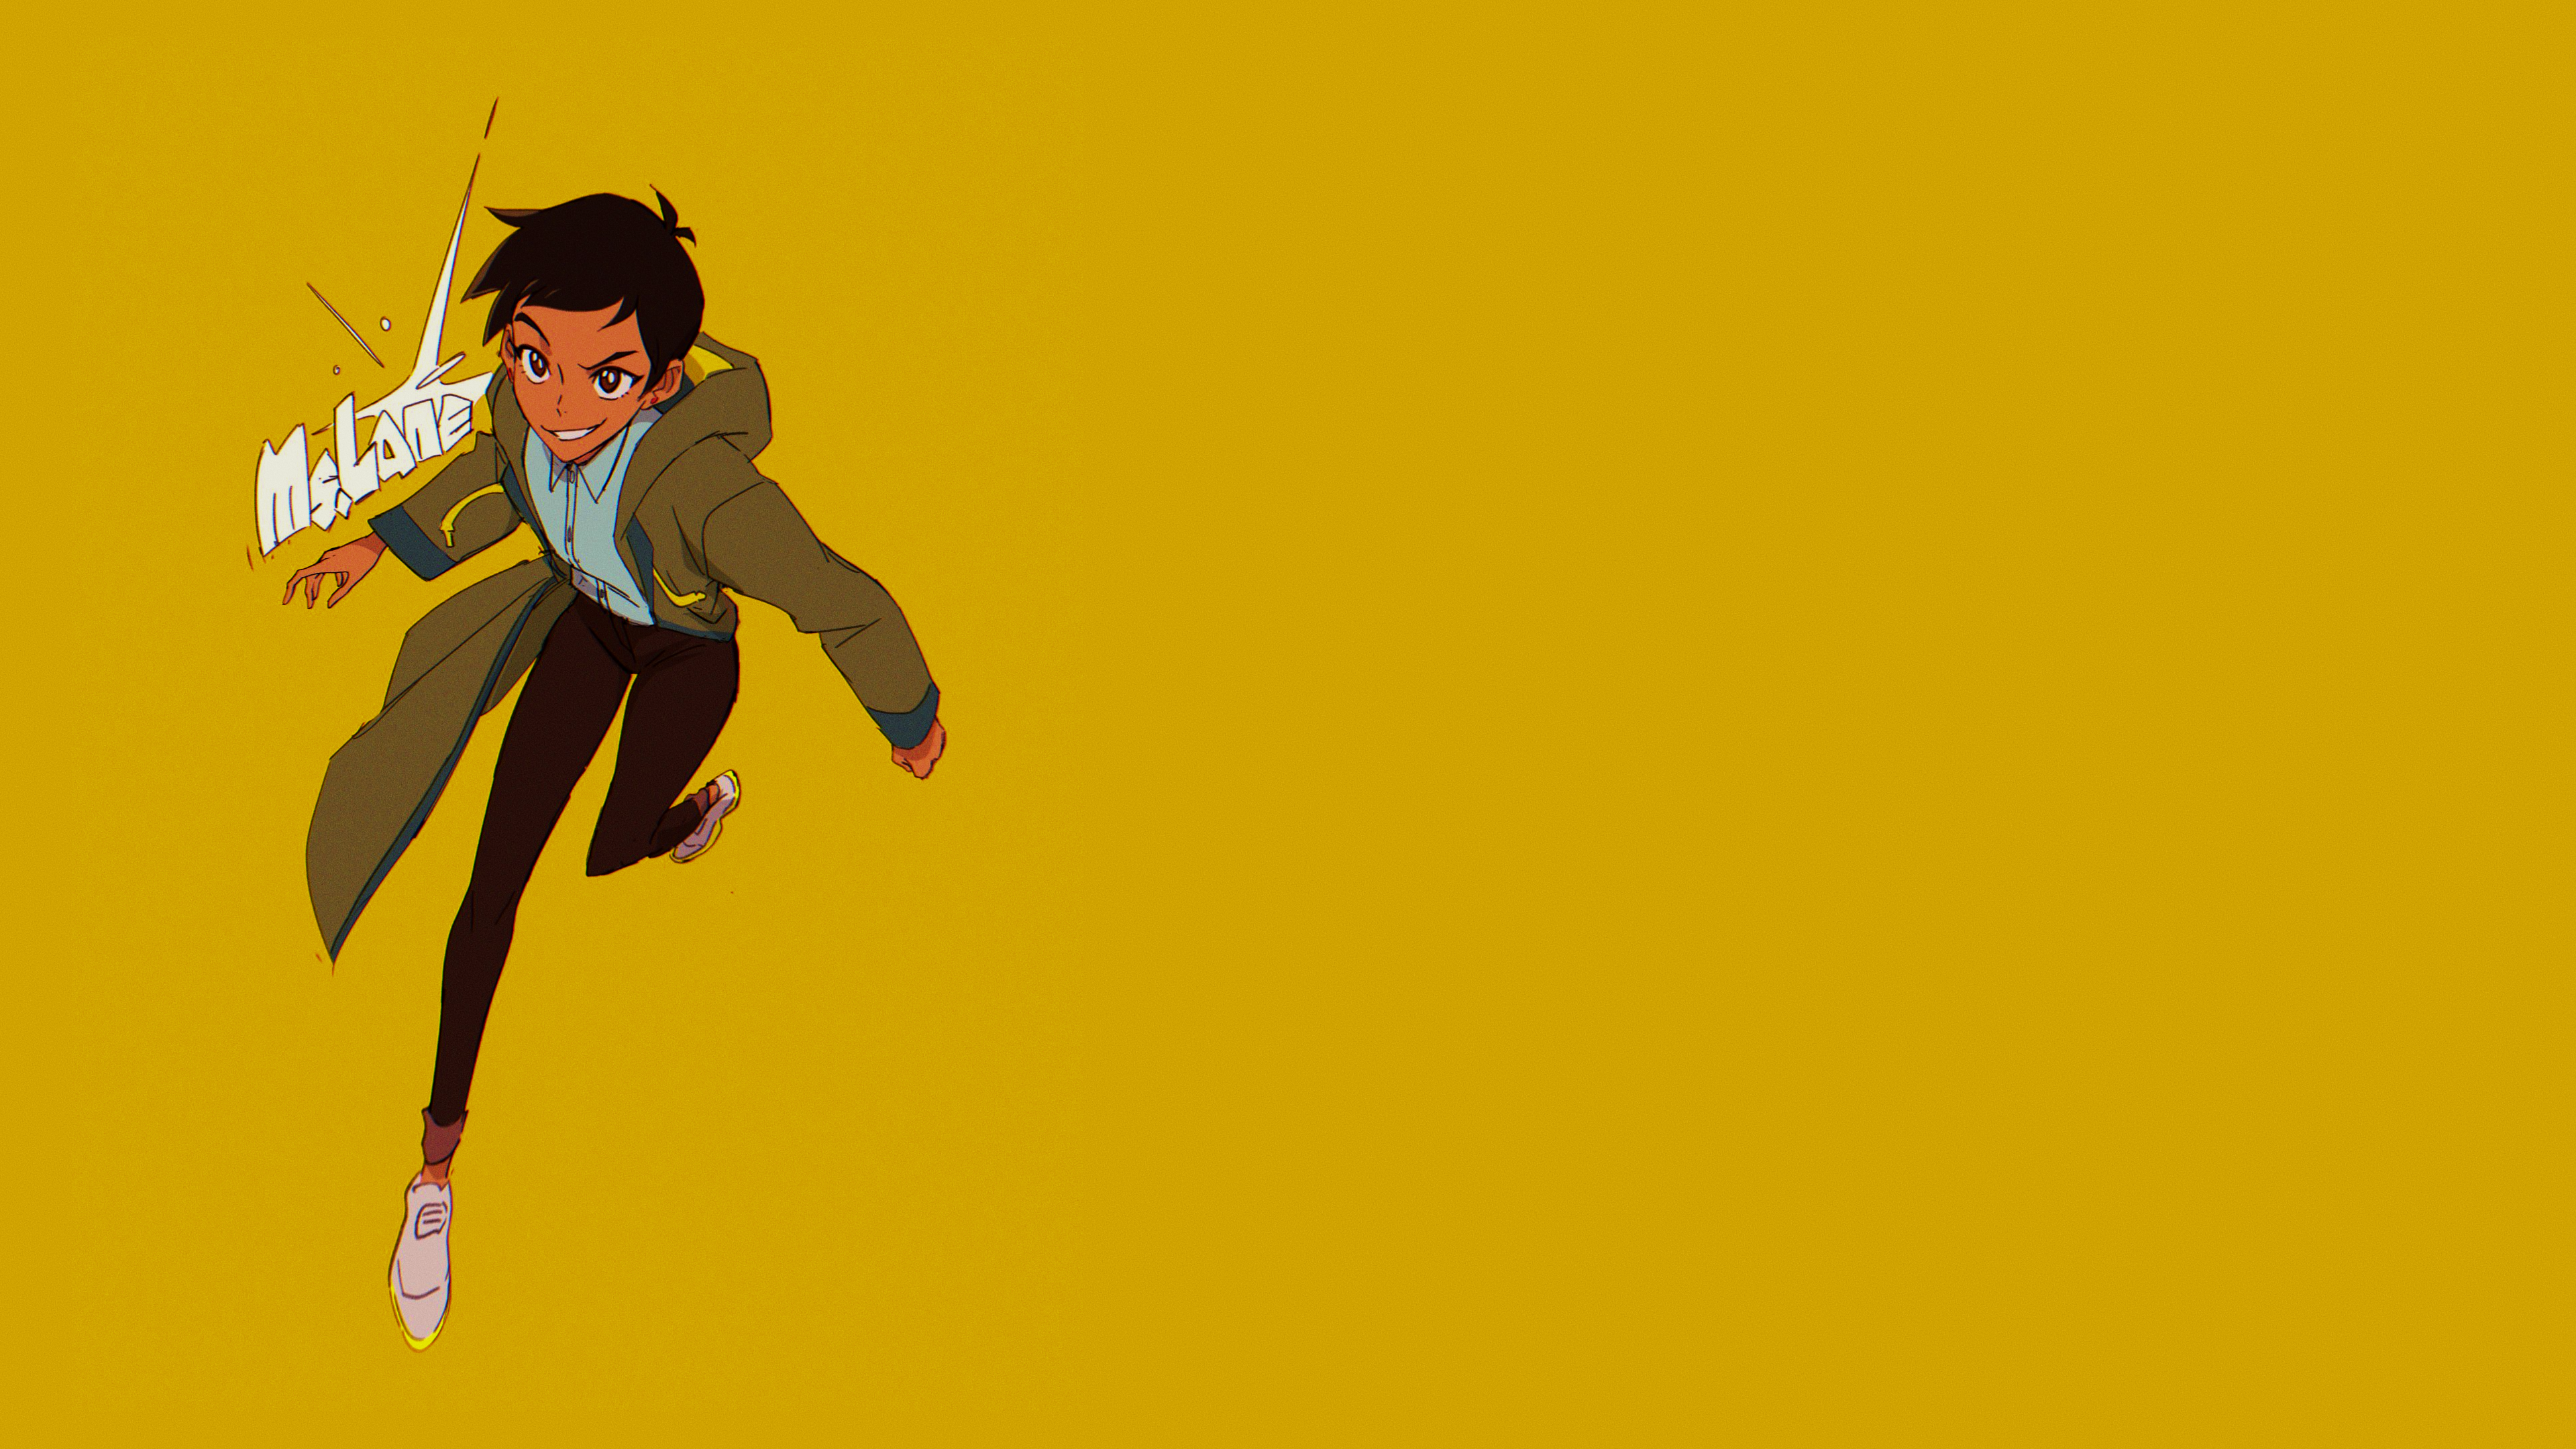 General 3840x2160 My Adventures with Superman Lois Lane jacket blouses white blouse black pants text Superman buttons tight clothing tight pants earring brown eyes hoods smiling teeth dark hair sketches simple background yellow background eyebrows minimalism shoes sneakers